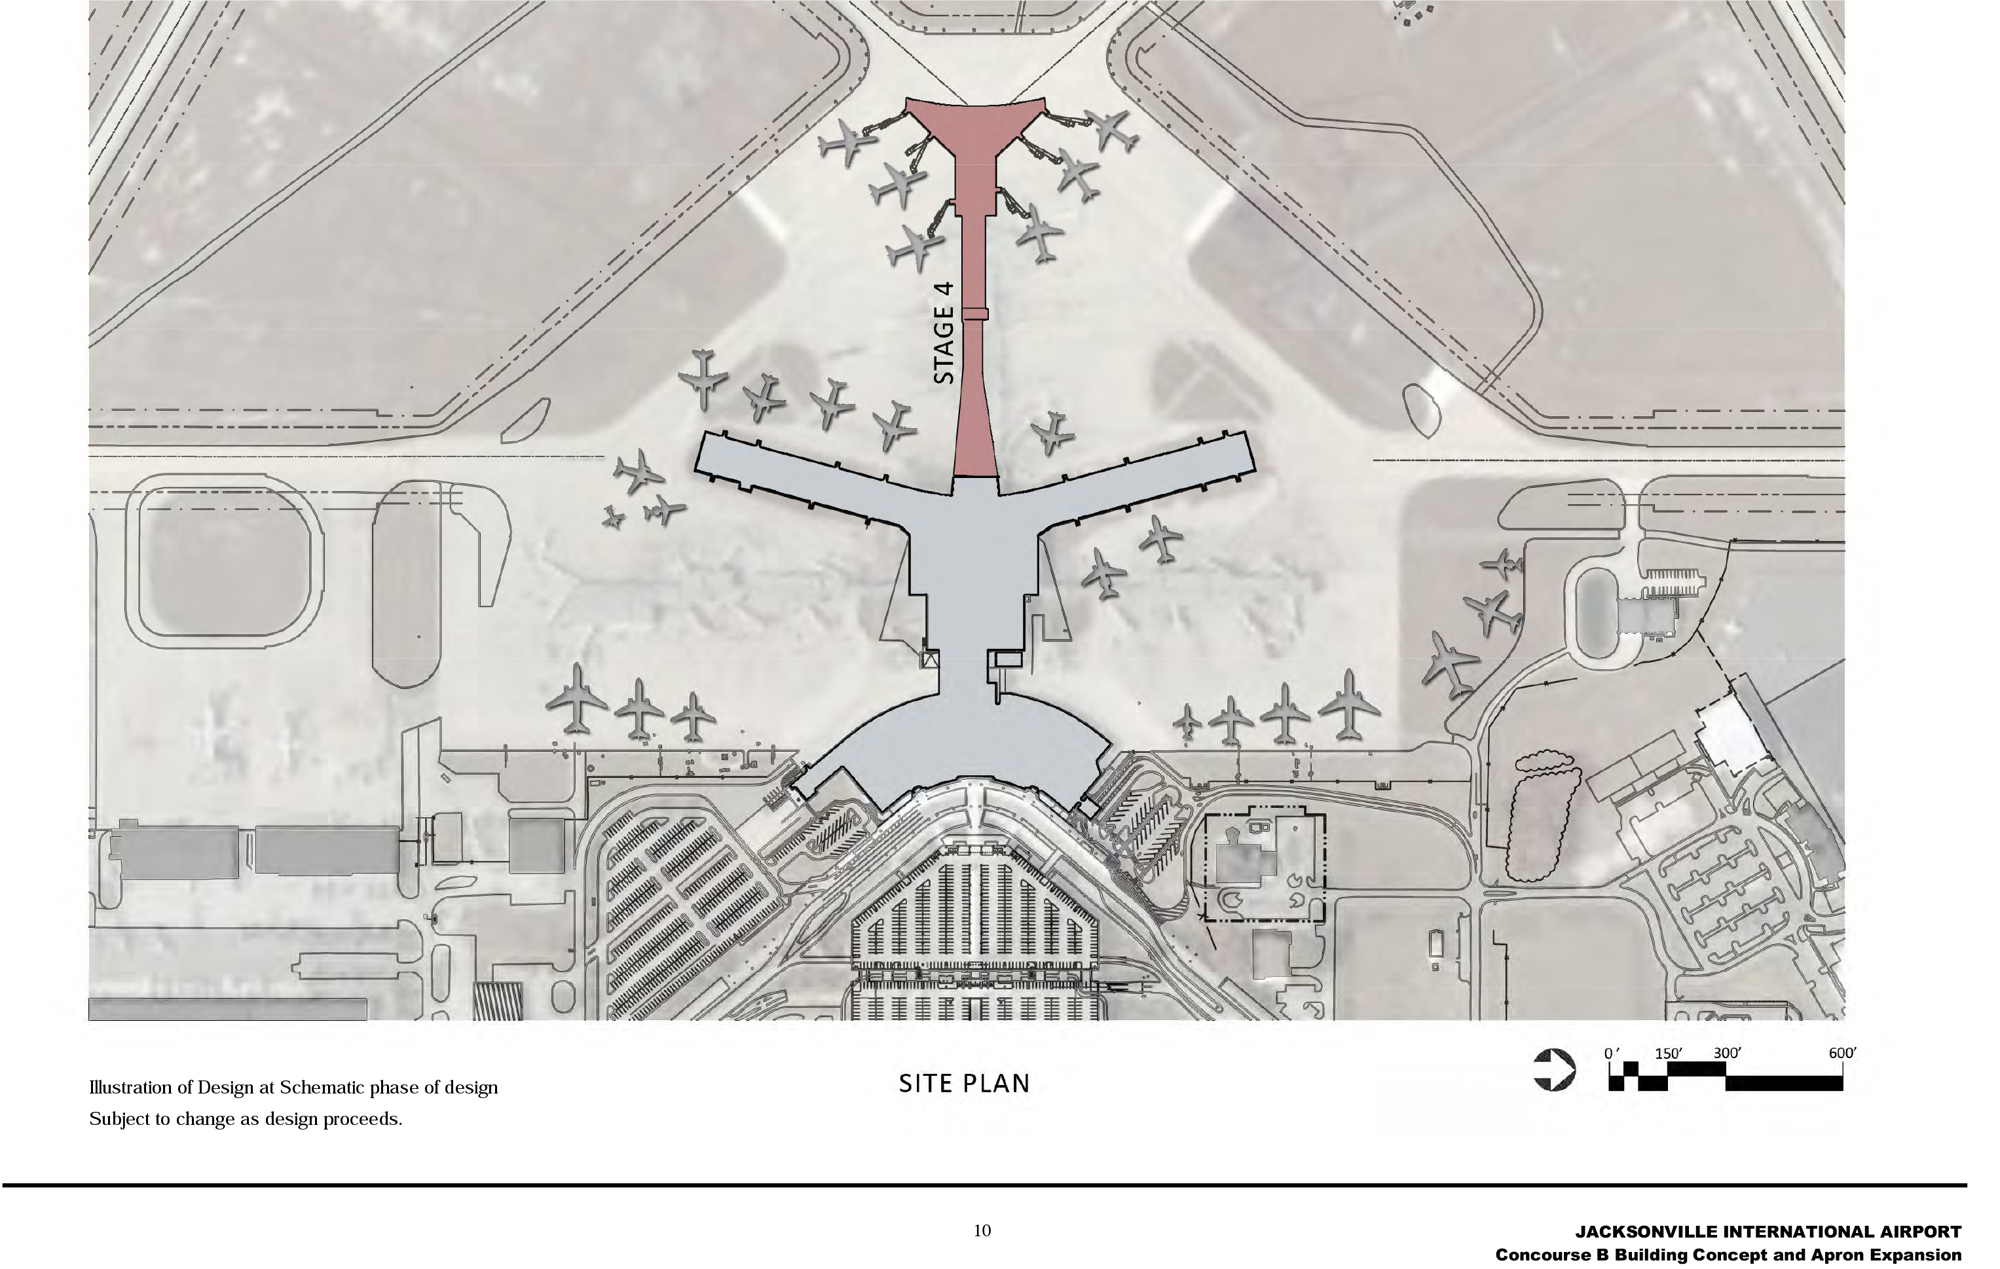 The 2011 site plan shows a third concourse at Jacksonville International Airport. The airport scrapped those plans because of low demand, but is seeking new plans.